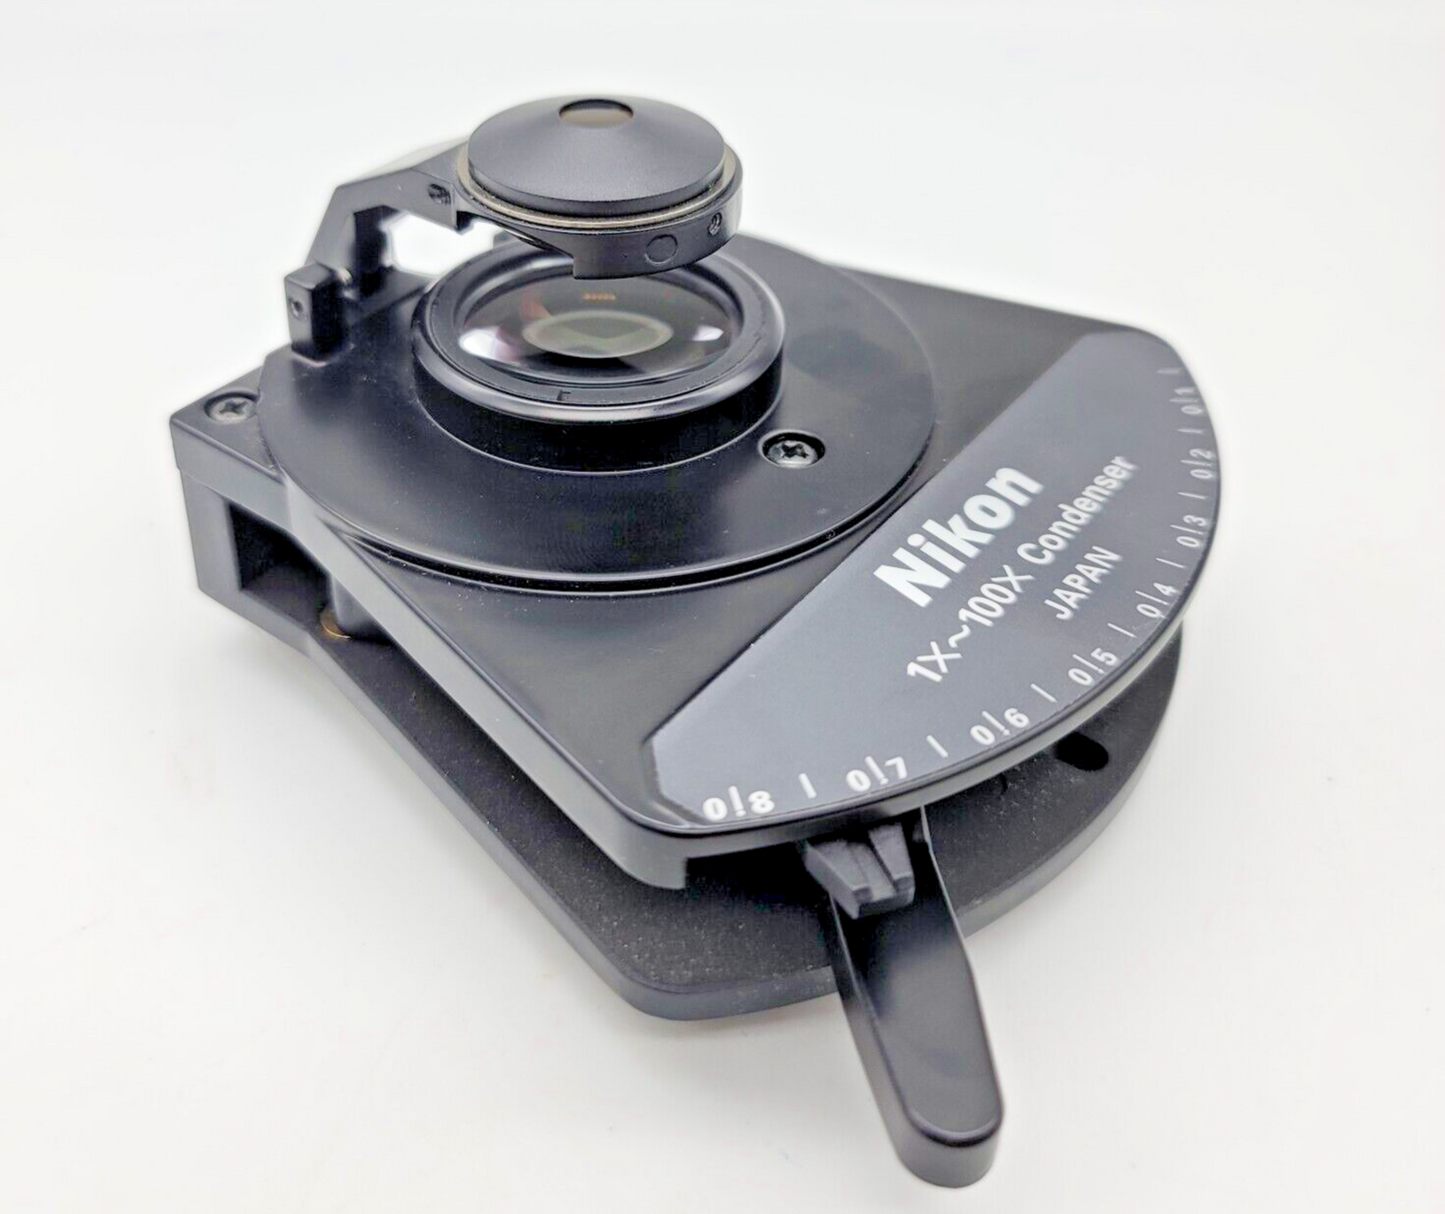 Nikon Microscope Swing Out Condenser C-SW Part# MBL71305 - microscopemarketplace